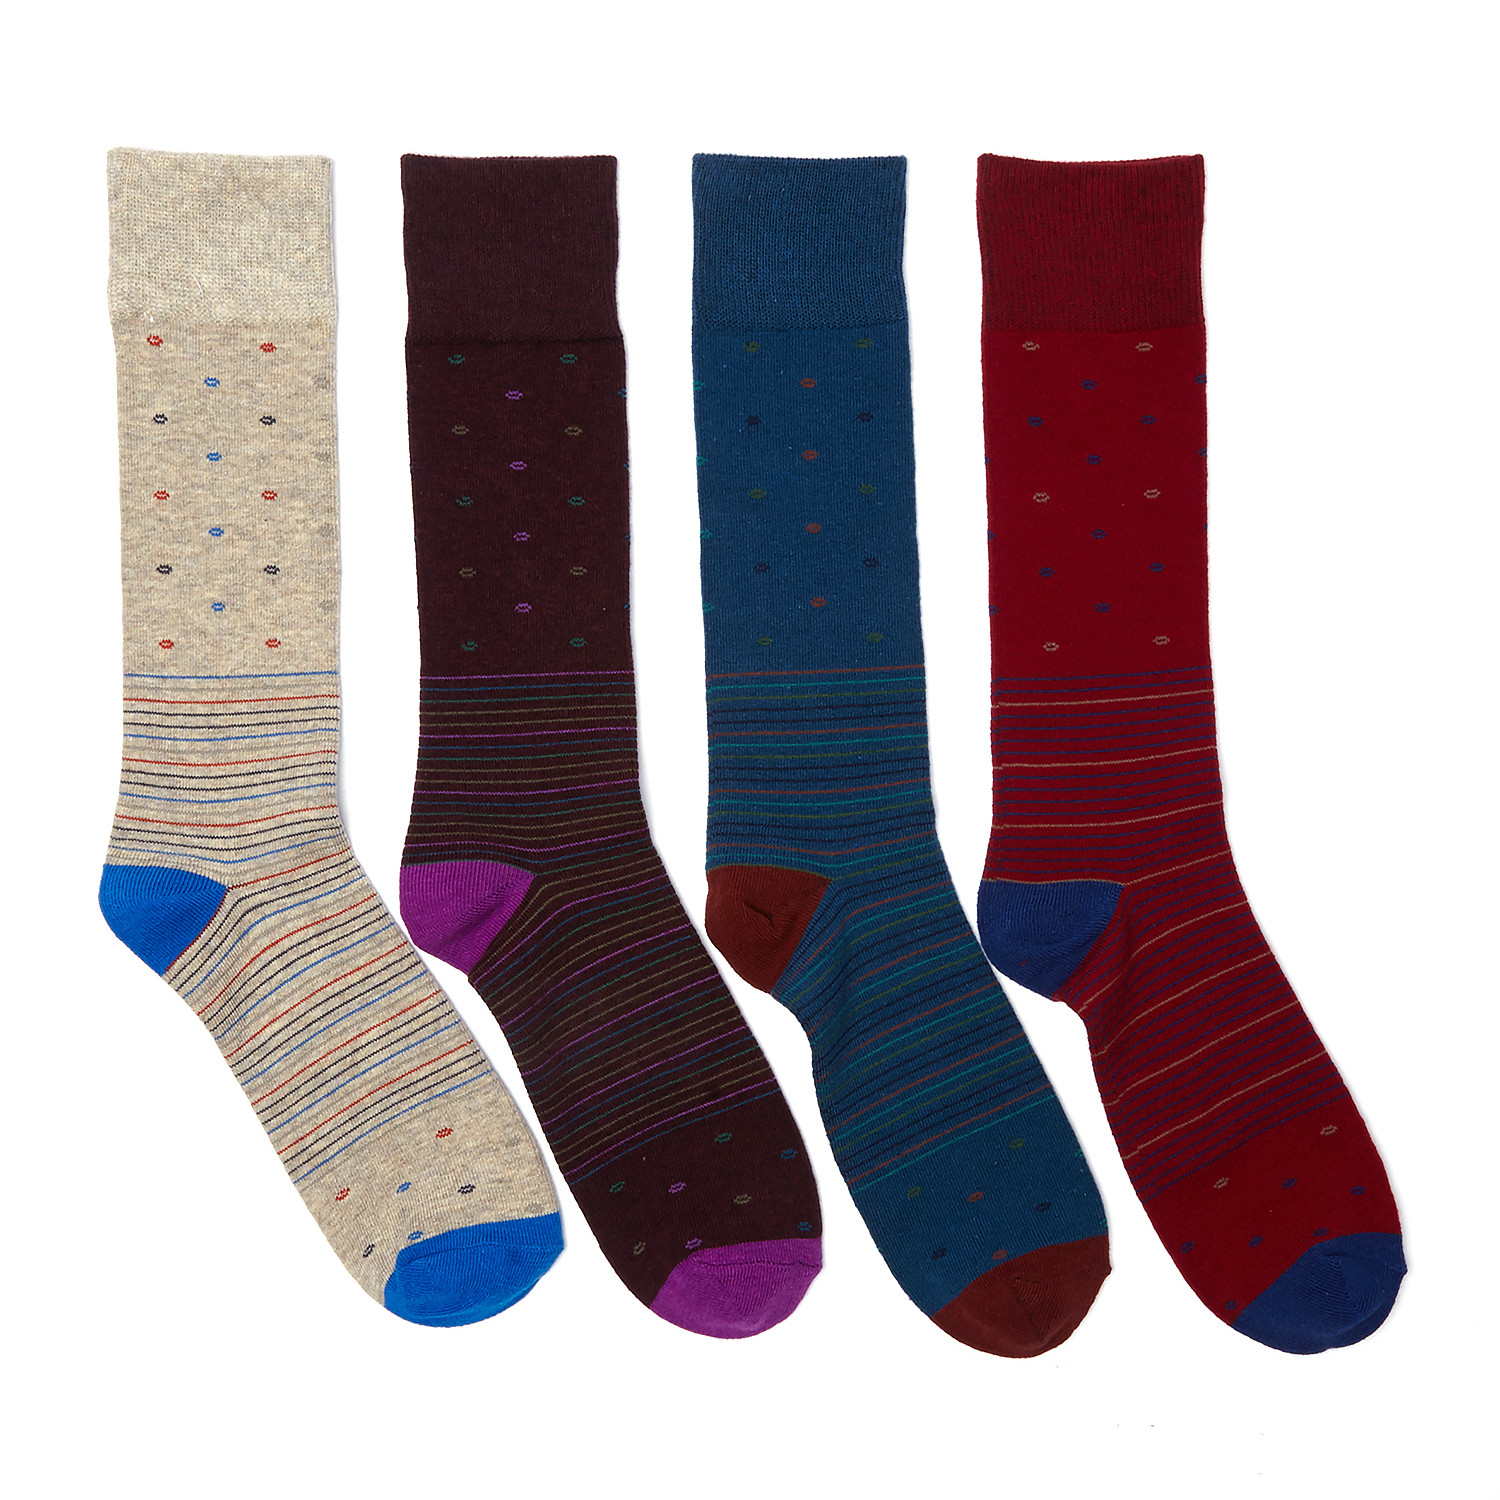 Generation Reset Socks // Pack of 4 - Stacy Adams - Touch of Modern